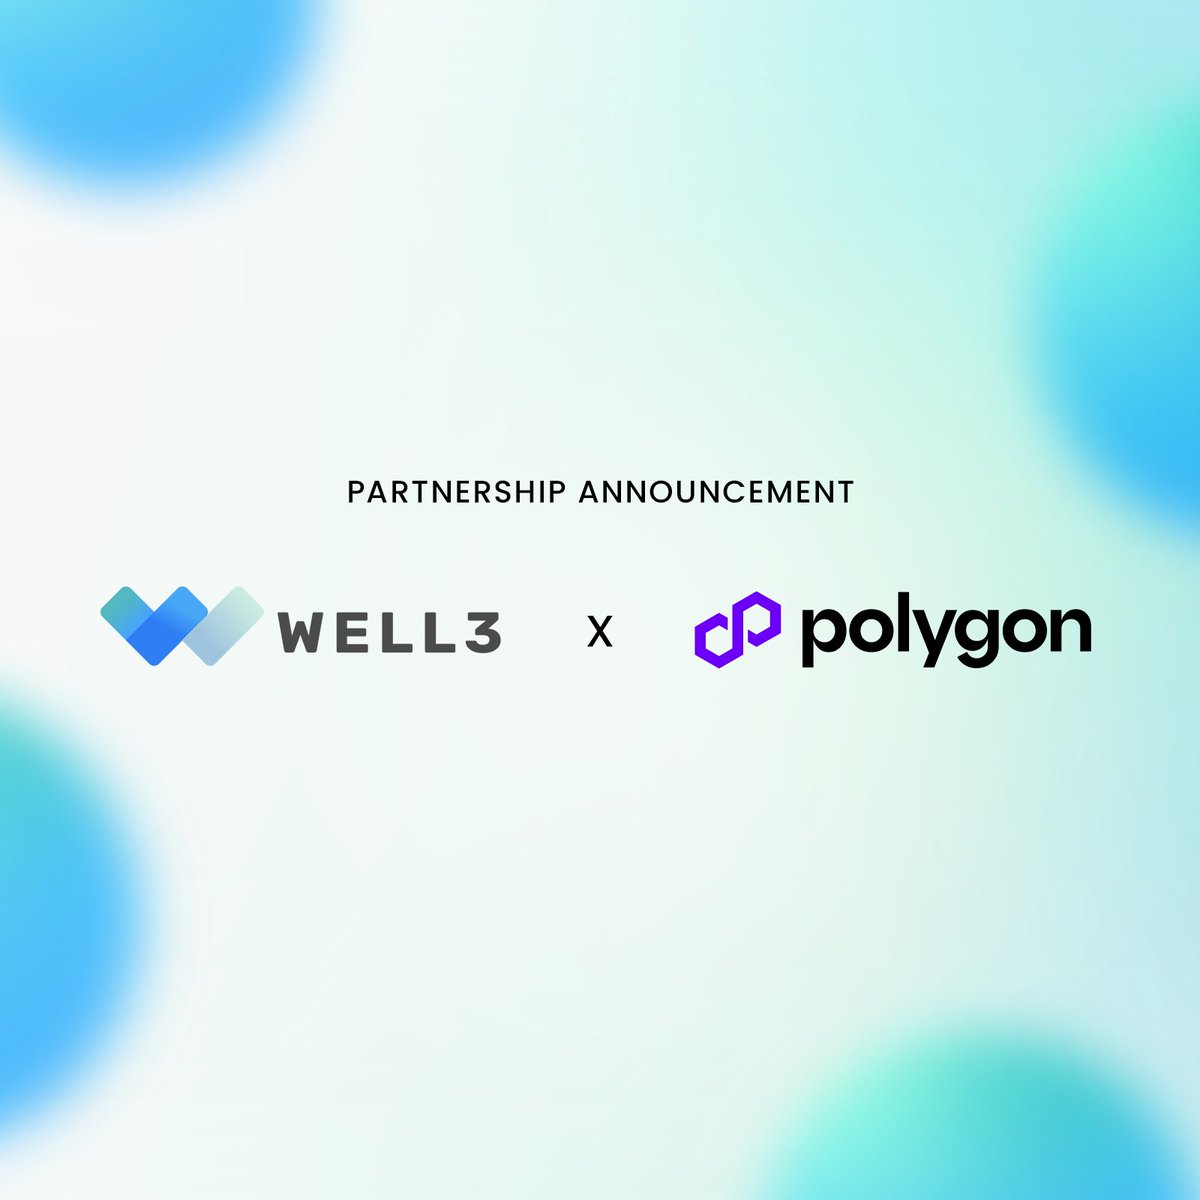 We are pleased to announce our integration with @0xPolygon PoS network to enhance WELL3’s scalability, security, and stability. This partnership marks a significant step forward in advancing the DEPIN ecosystem. Follow our progress for future updates on this exciting journey!